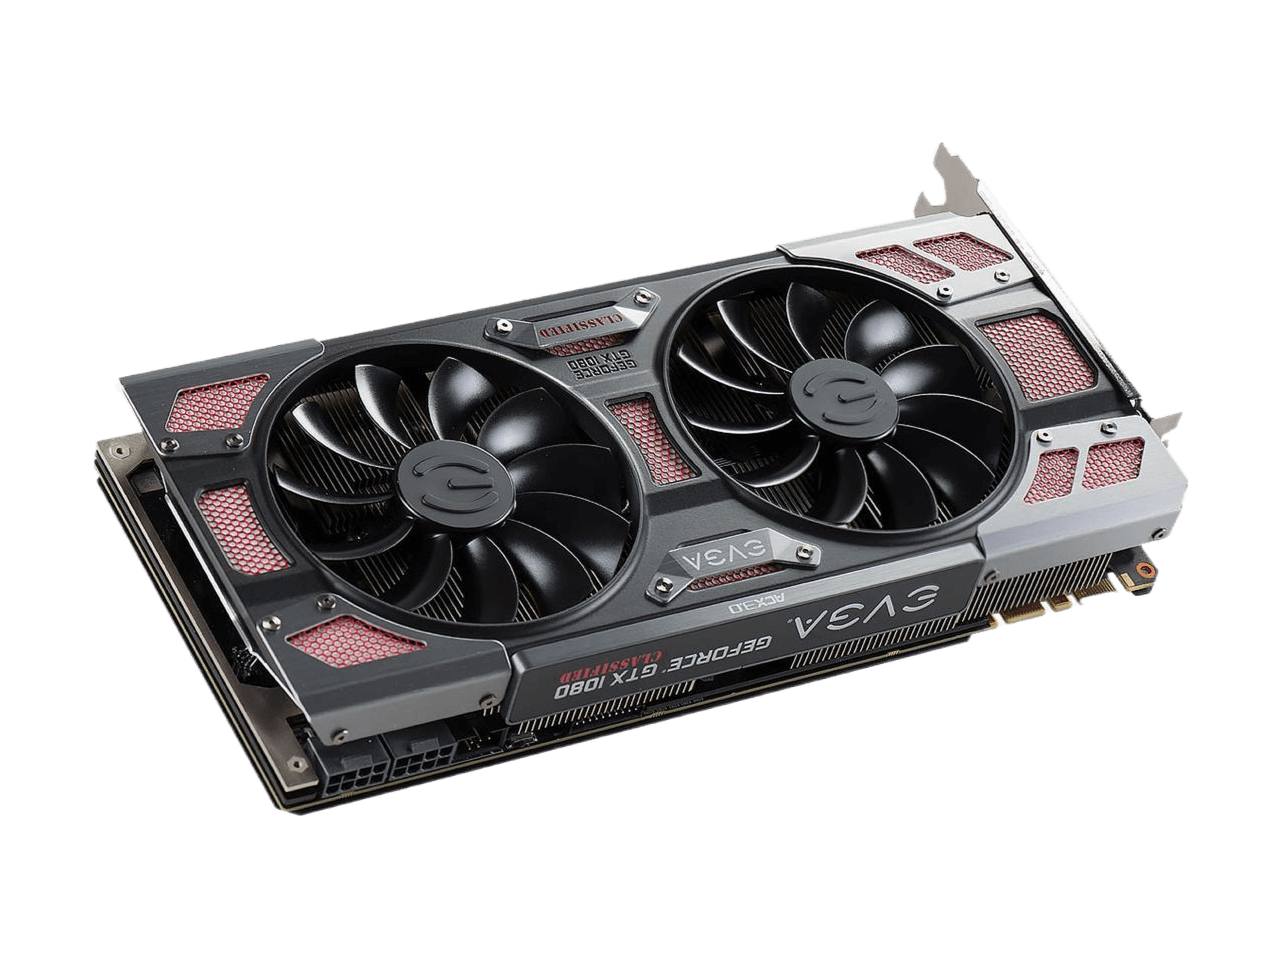 EVGA GeForce GTX 1080 CLASSIFIED GAMING ACX 3.0 8GB GDDR5X RGB LED 10 CM Fan 14 Power Phases Double BIOS DX12 OSD Support (PXOC) Video Graphics Card 08G-P4-6386-KR